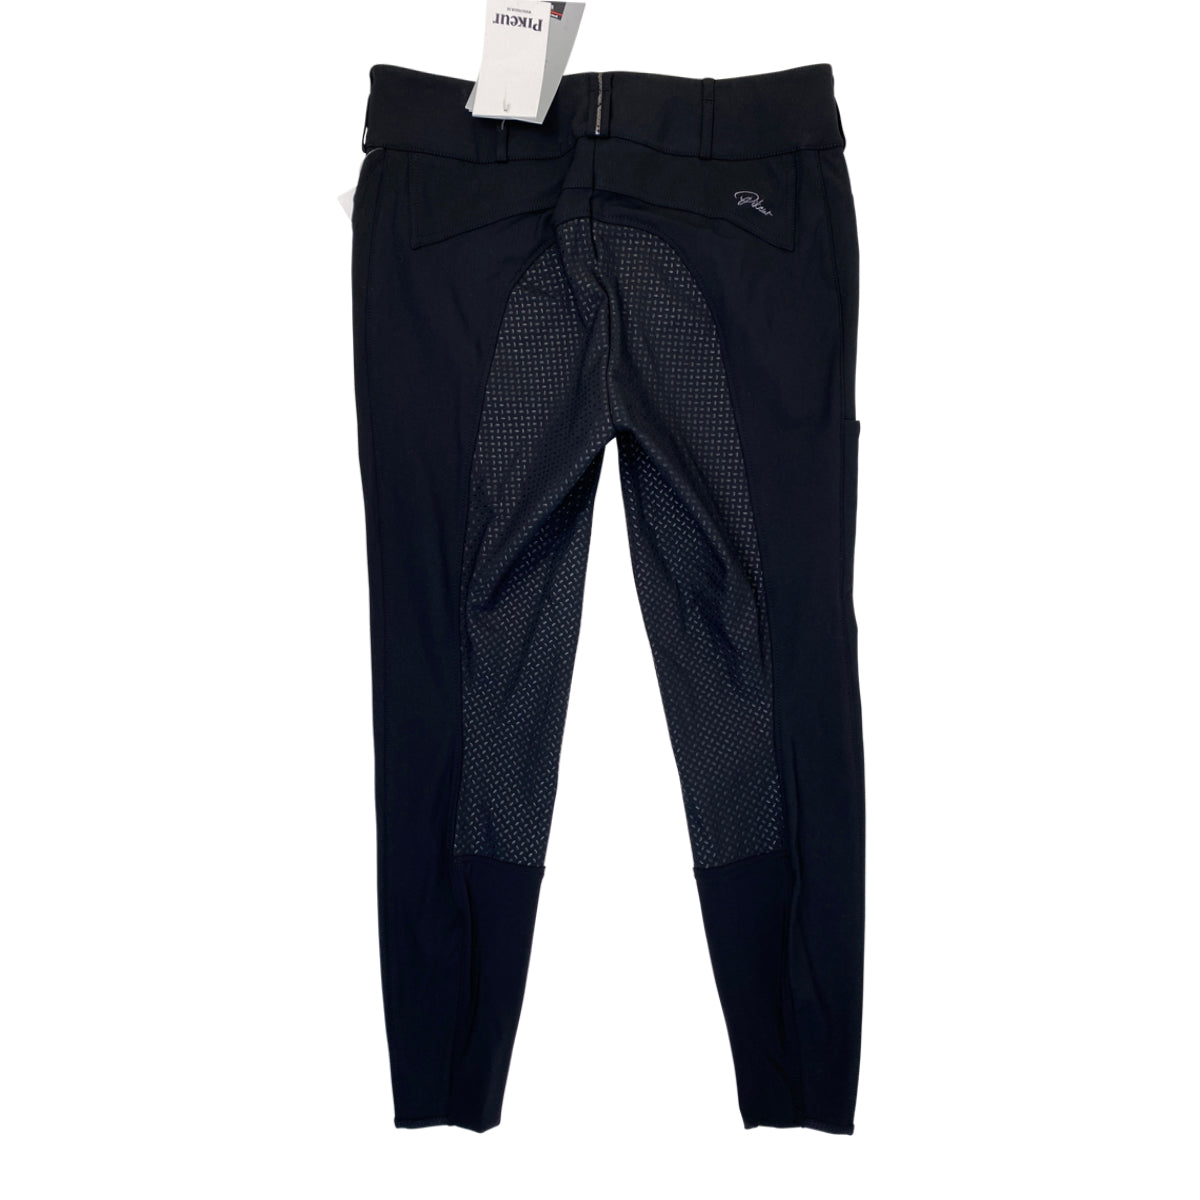 Pikeur 'Candela Glamour' Breeches in Black 